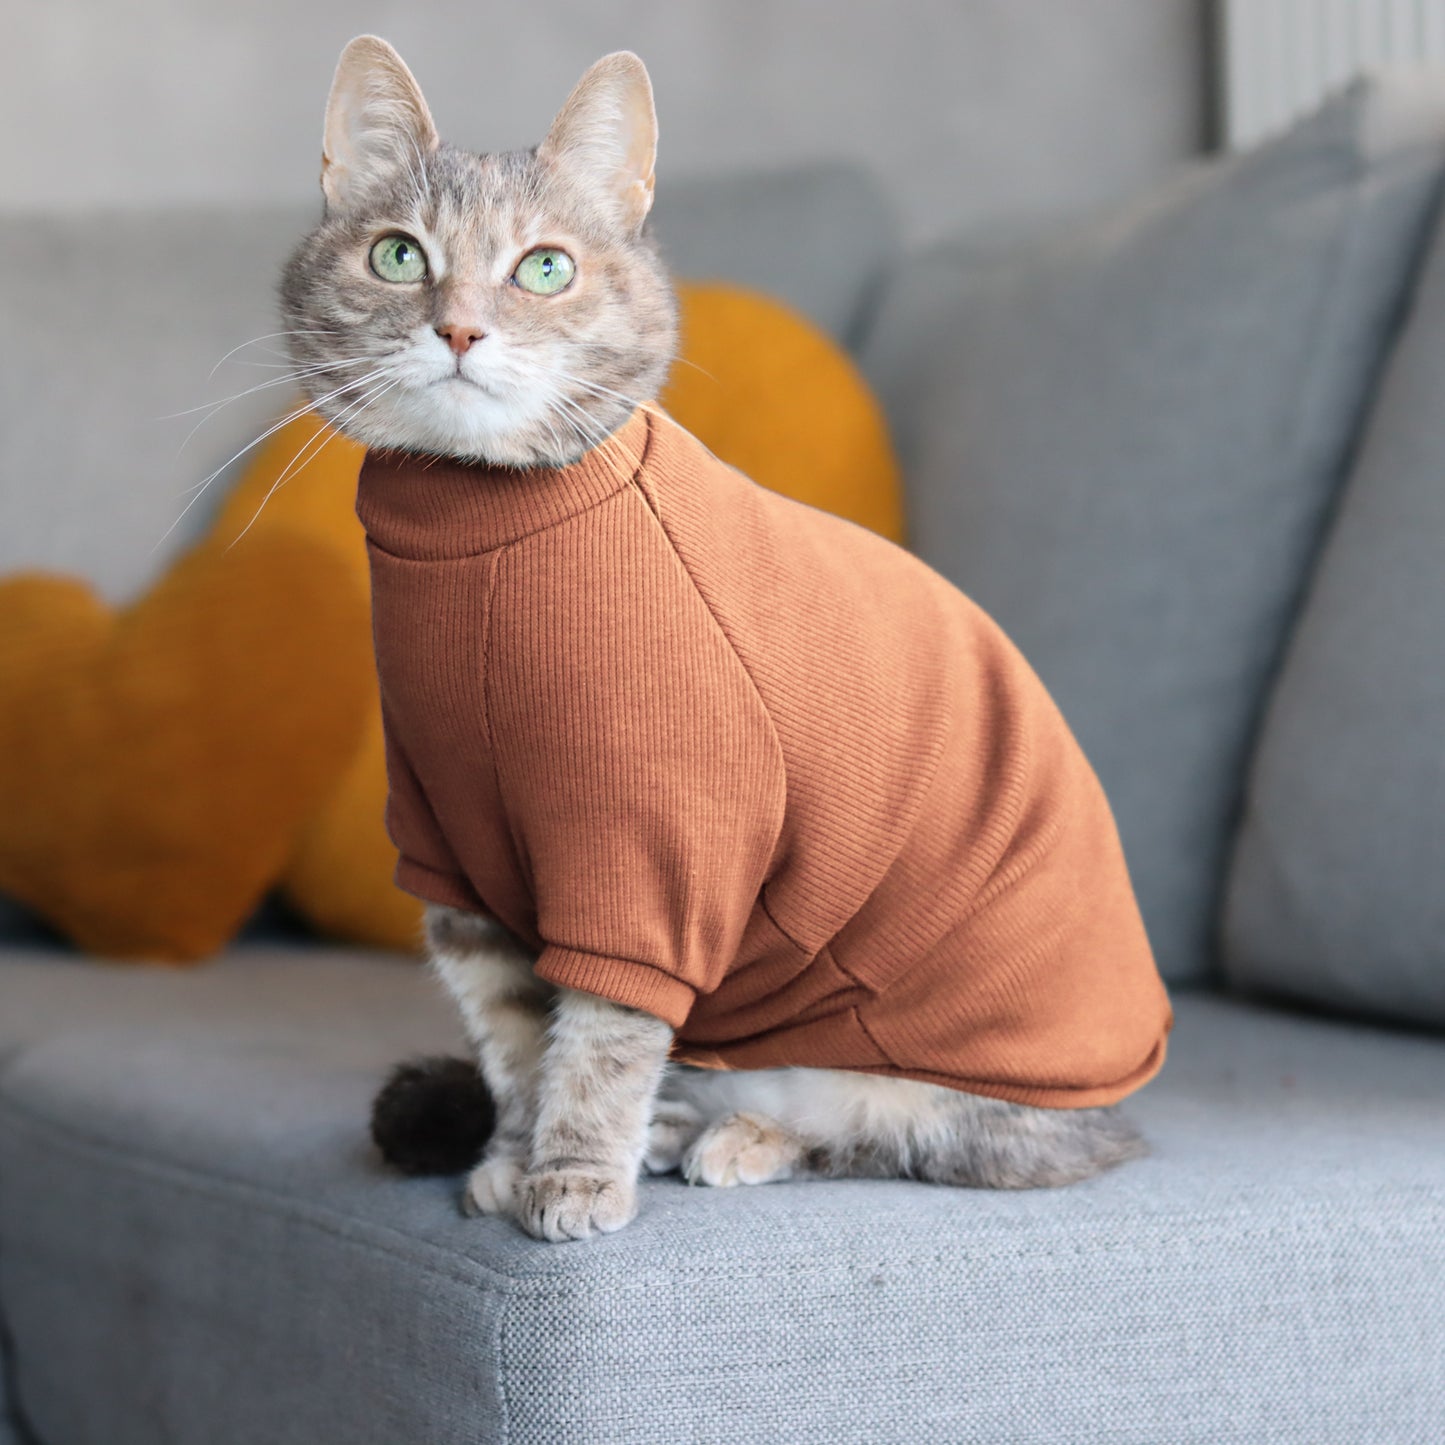 Ginger cotton sweater for Cat. Shirt for Sphynx and all cats breeds